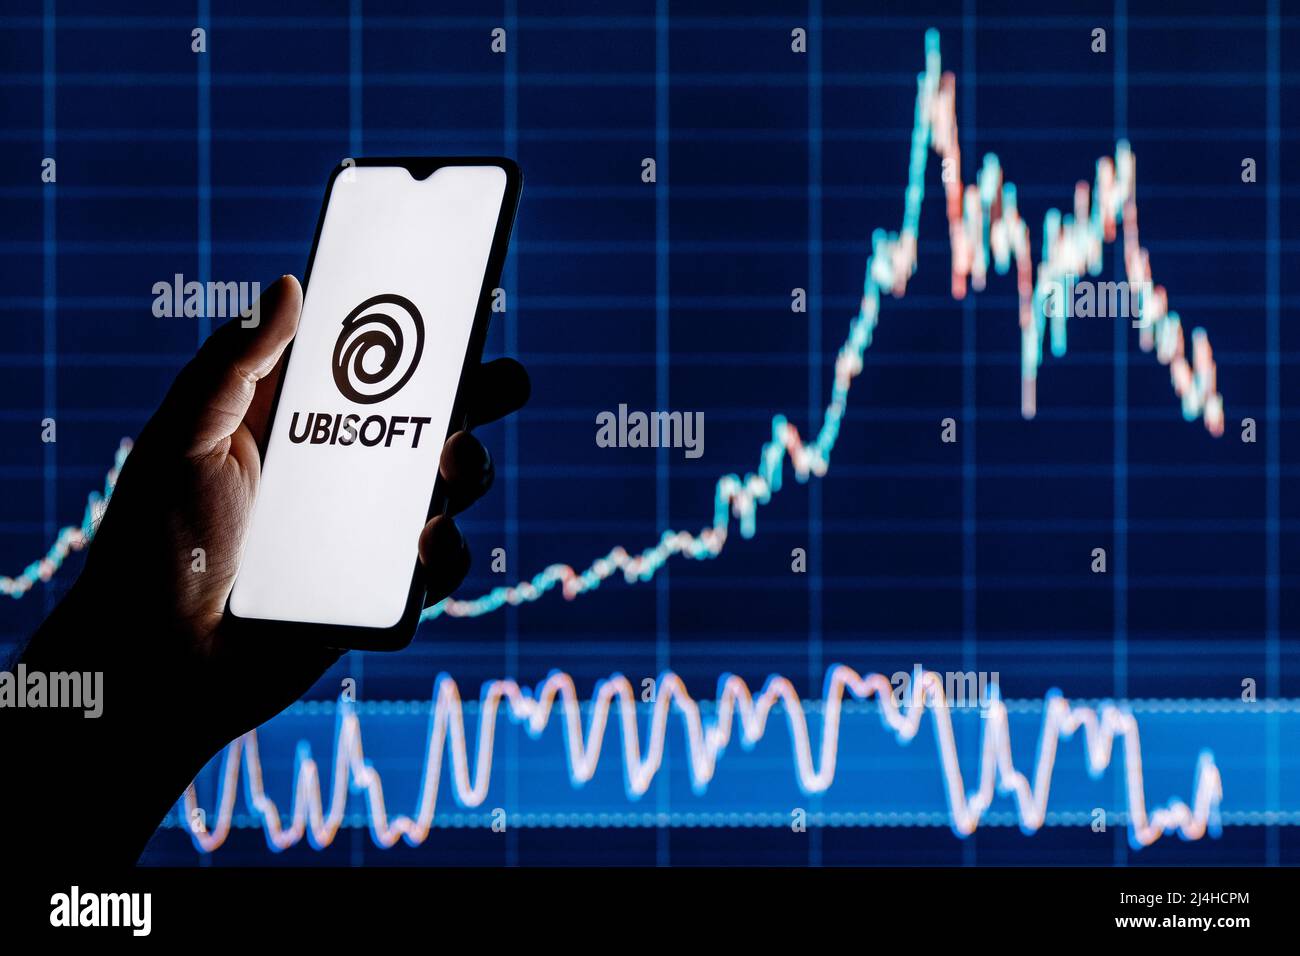 Ubisoft is French video game company. Smartphone with Ubisoft logo in hand. Stock chart on background. Stock Photo